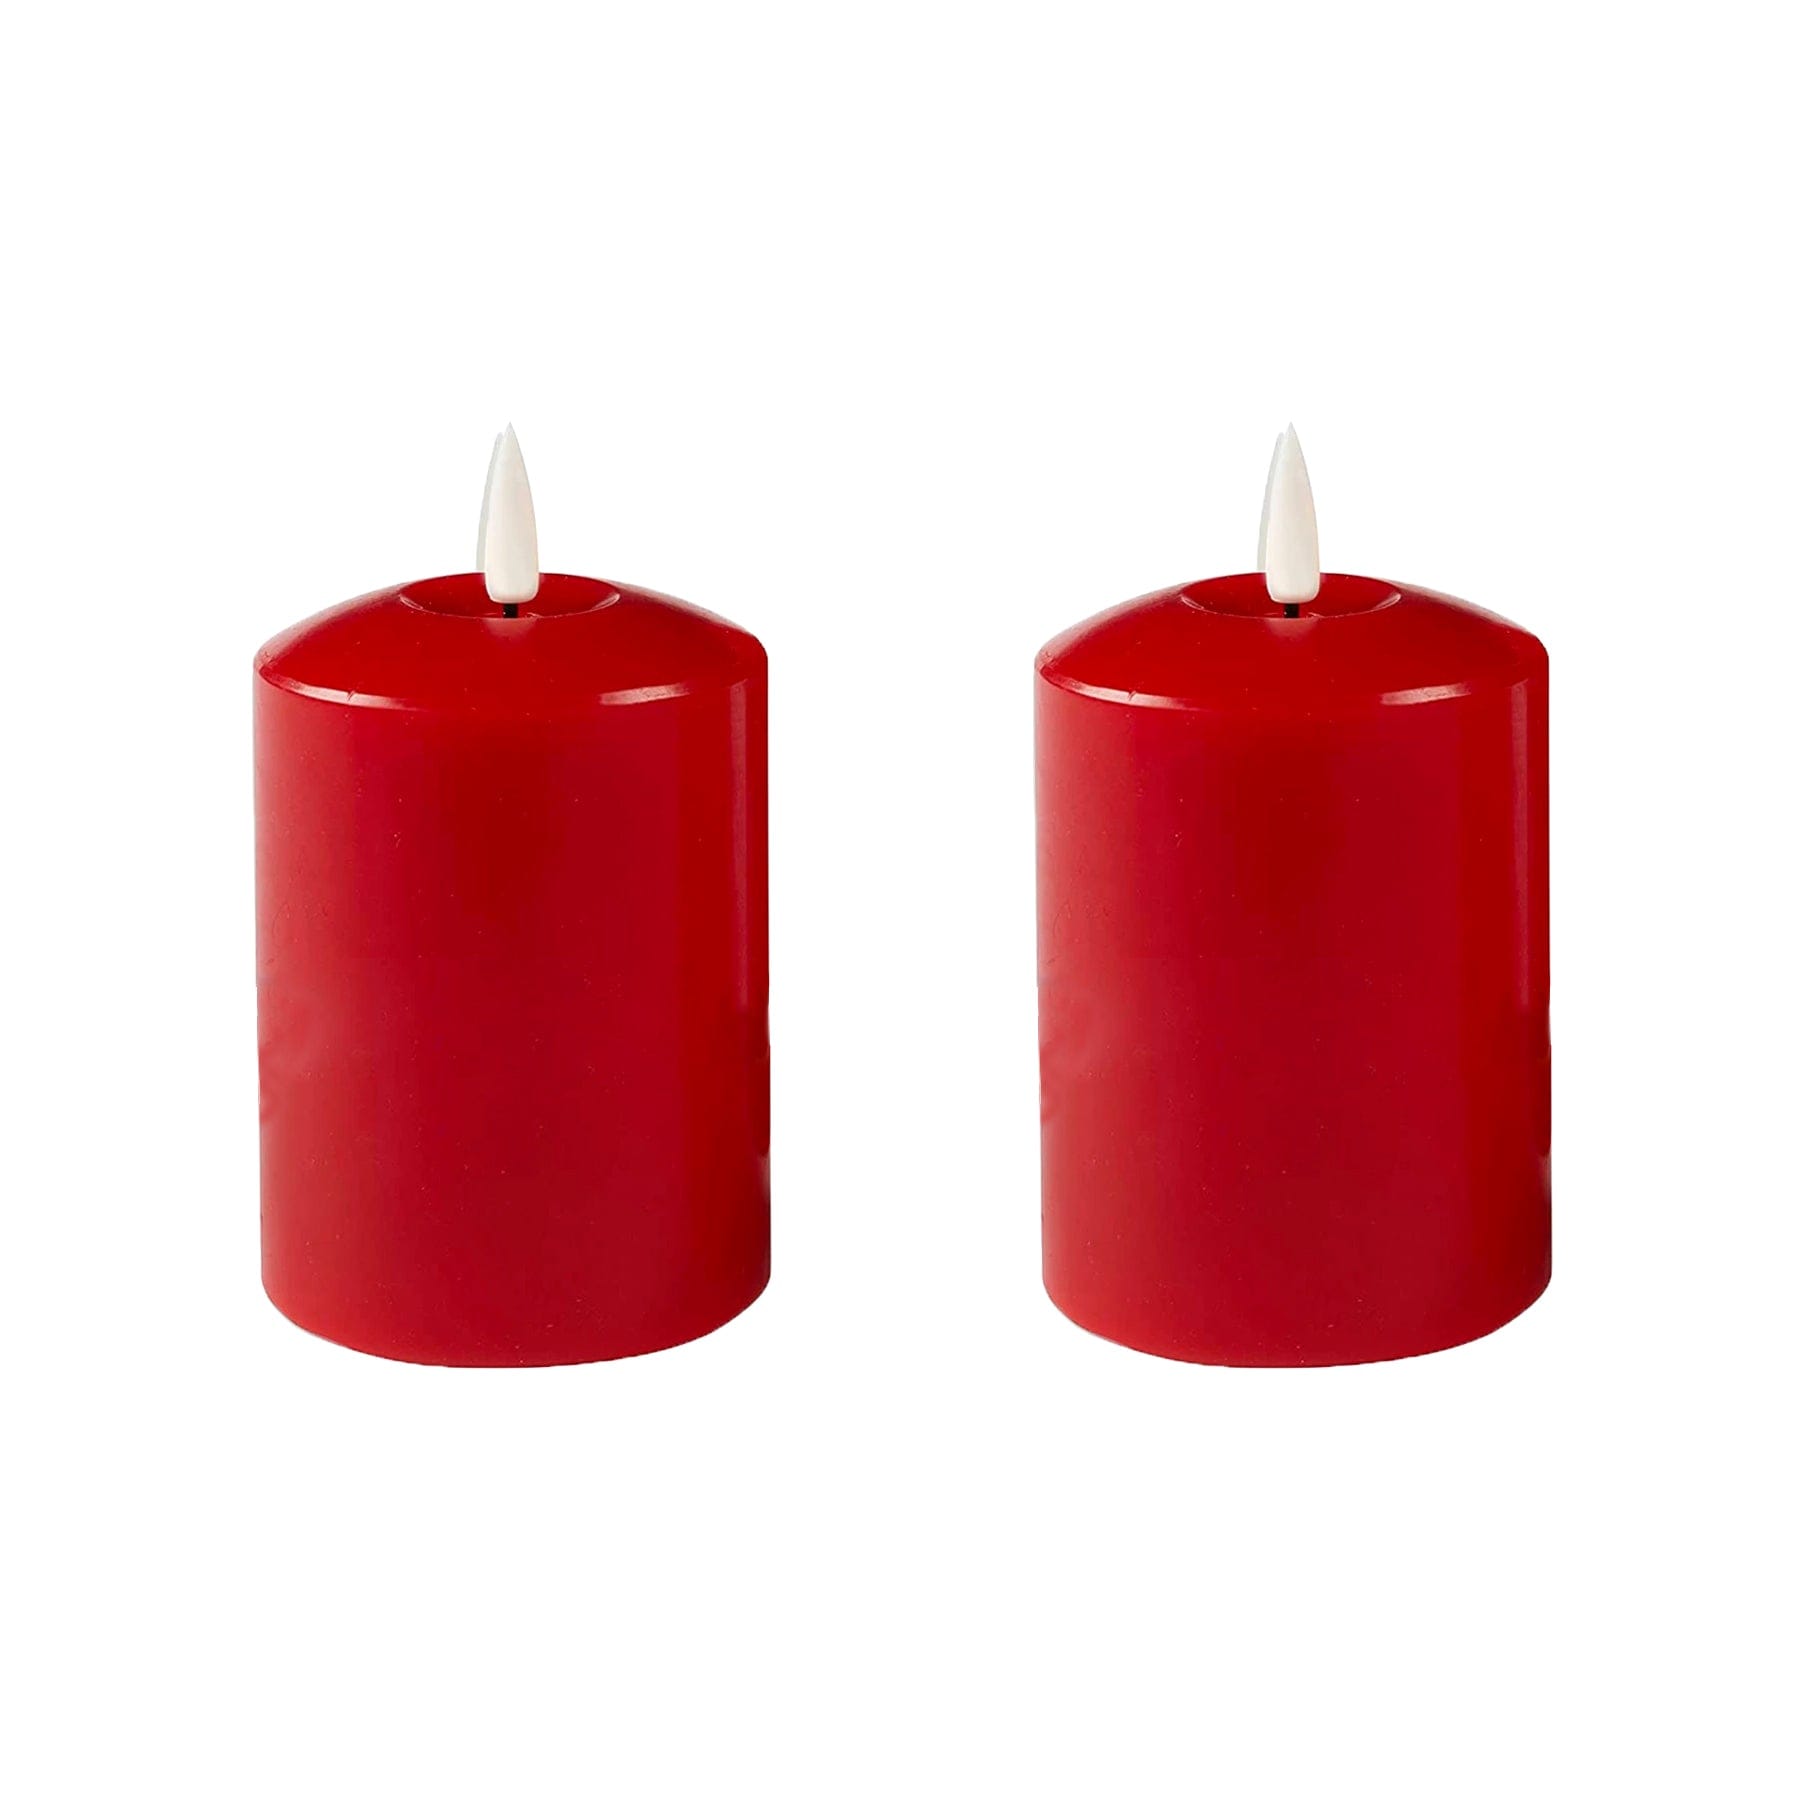 Lexi Lighting Christmas Table Decoration&Candle 13.5cm Set of 2 LED Red Wax Pillar Candles - 3 Size Options LLCA01R